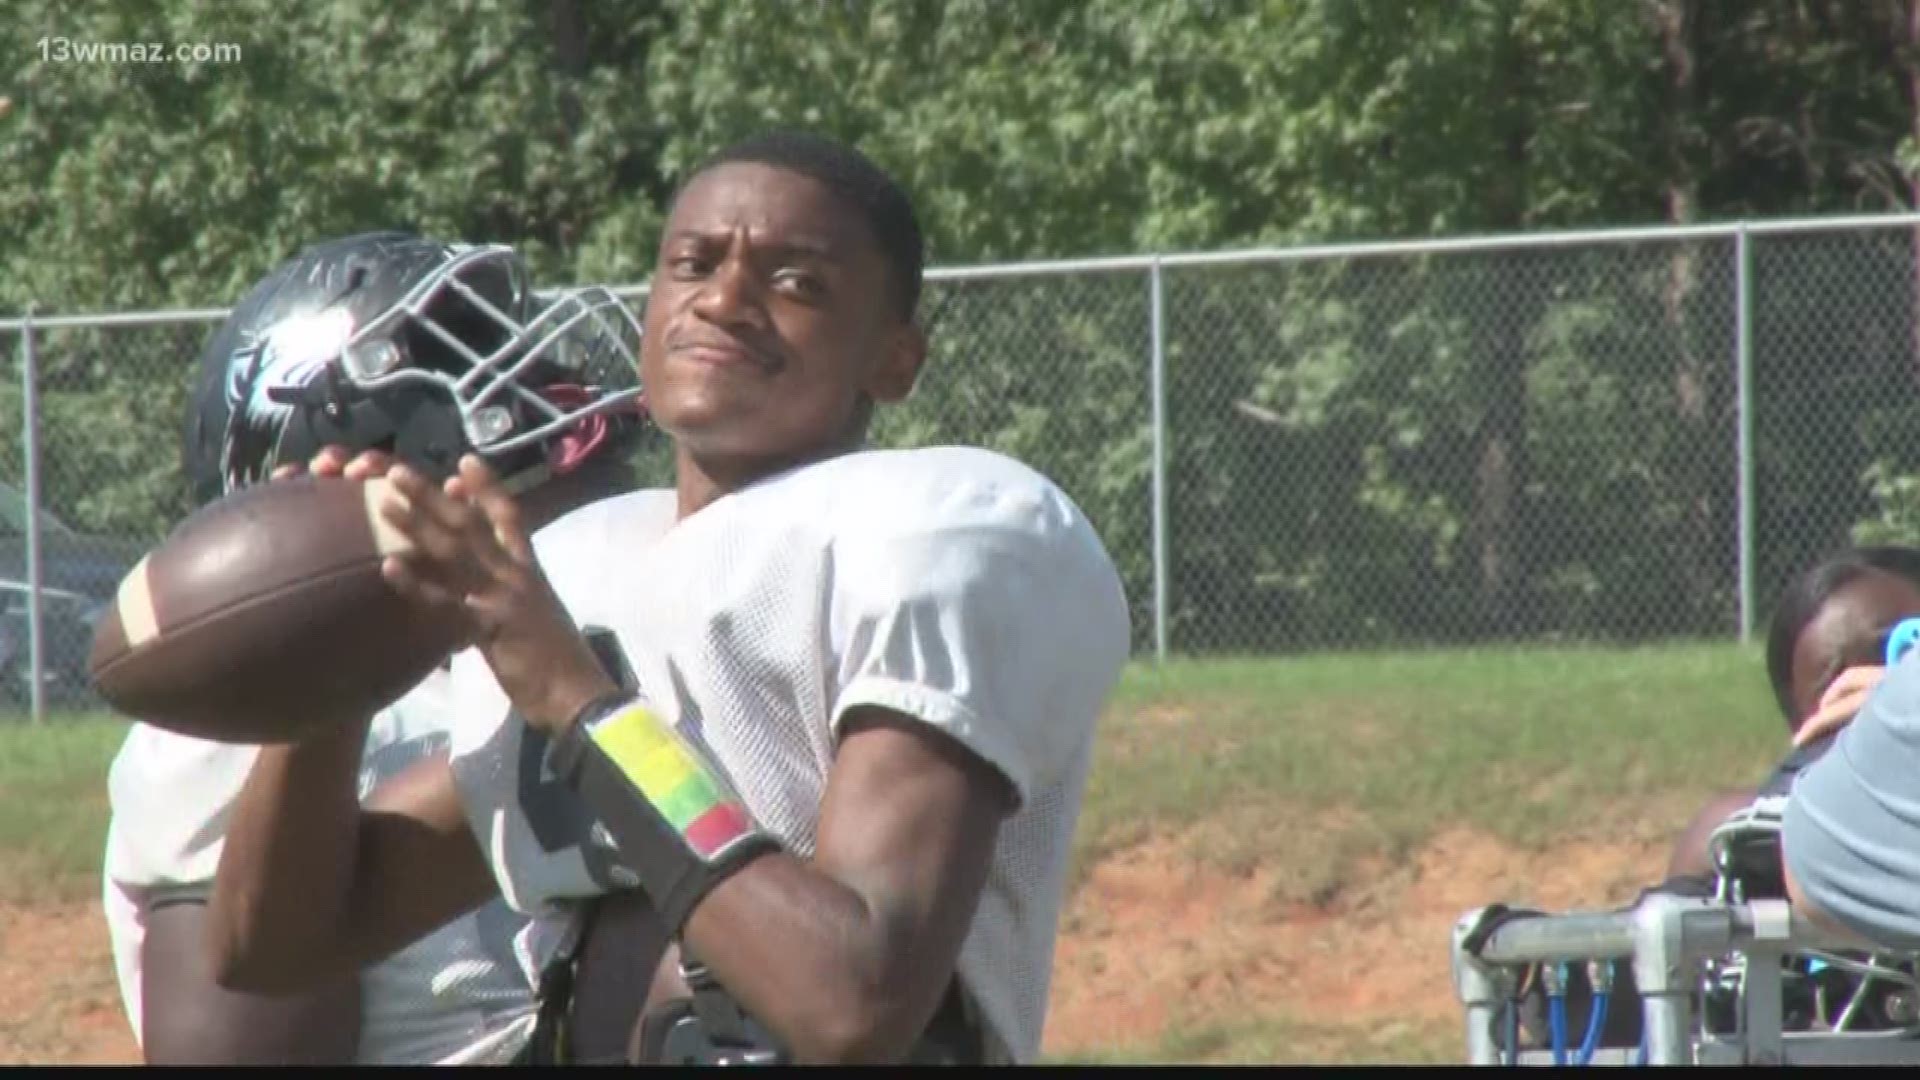 Jaylon Clark from Howard High School is our Athlete of the Week.